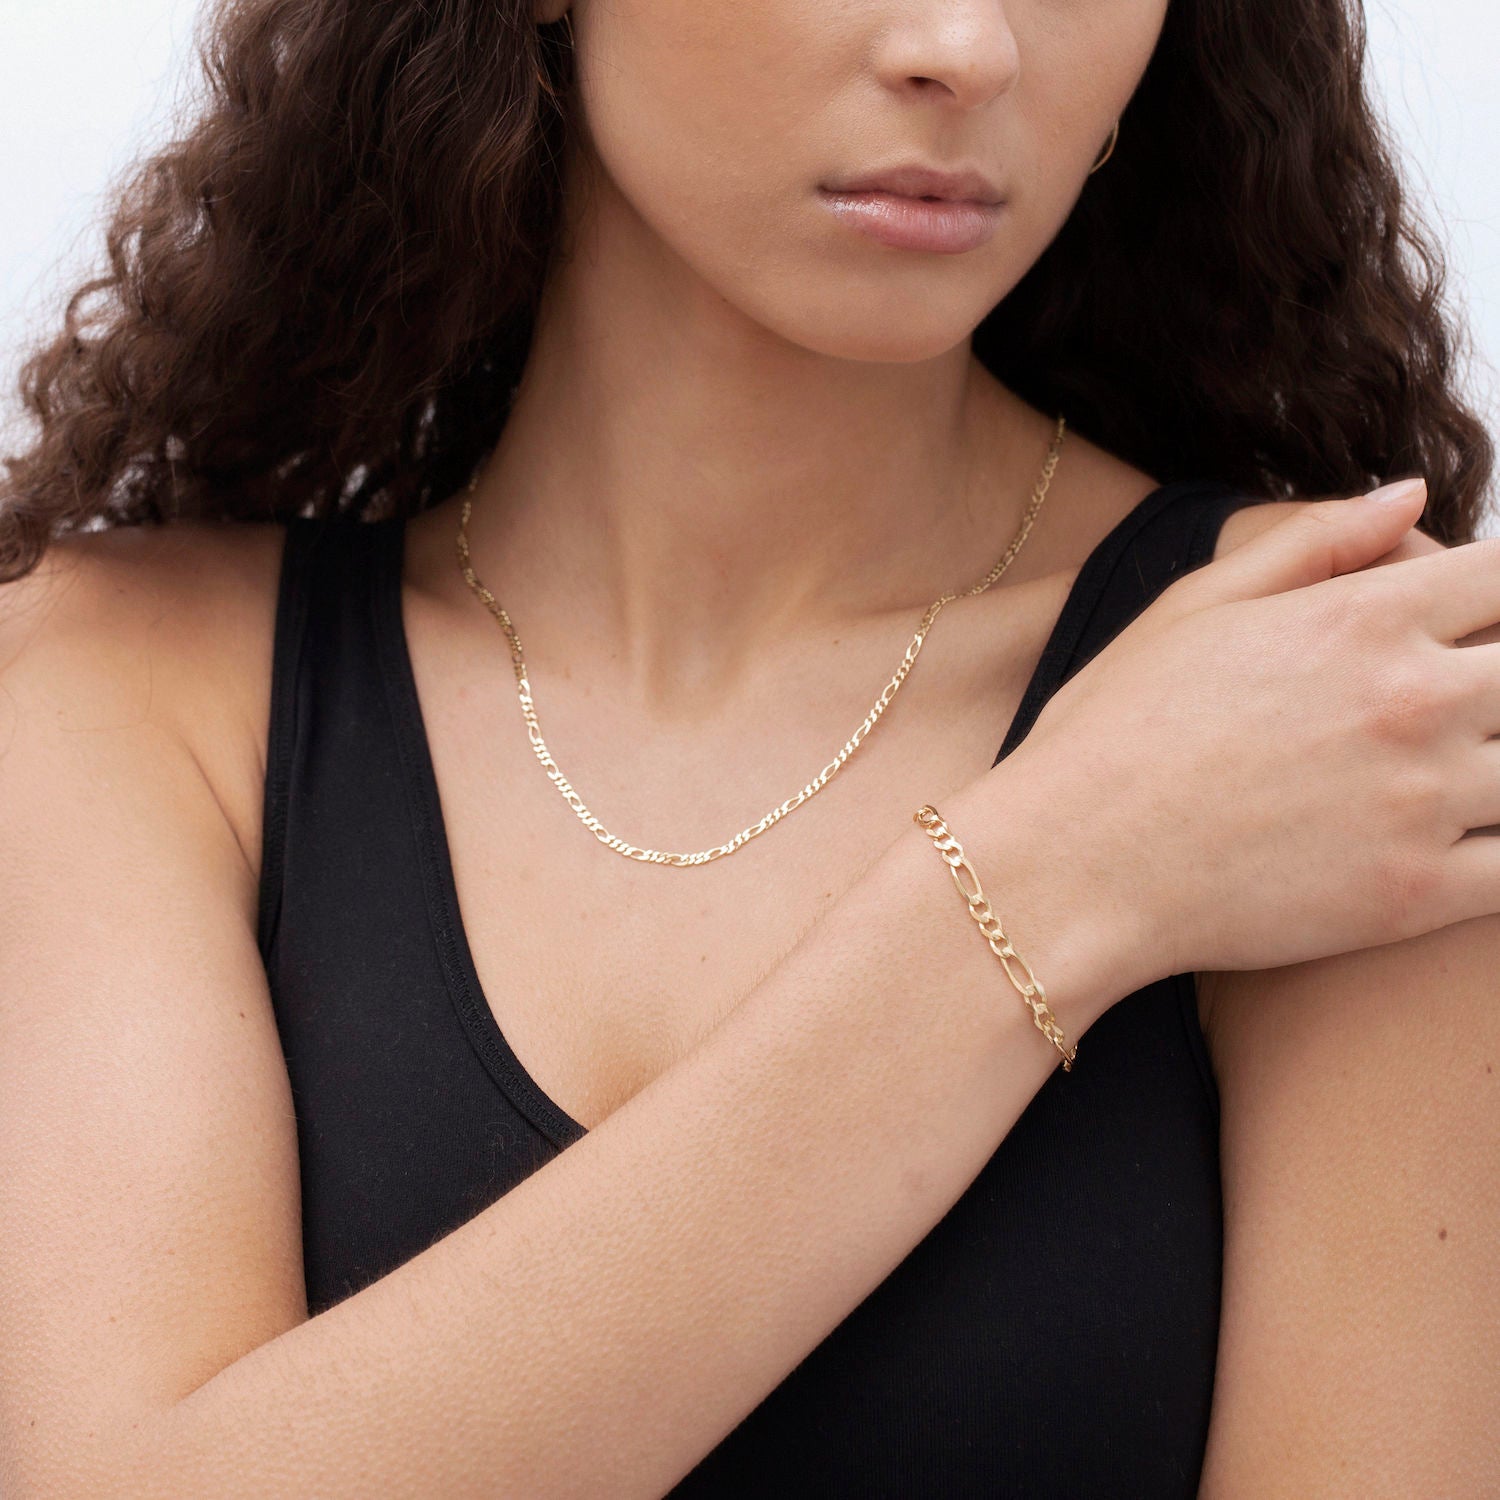 14K Solid Gold Figaro Necklace Chain